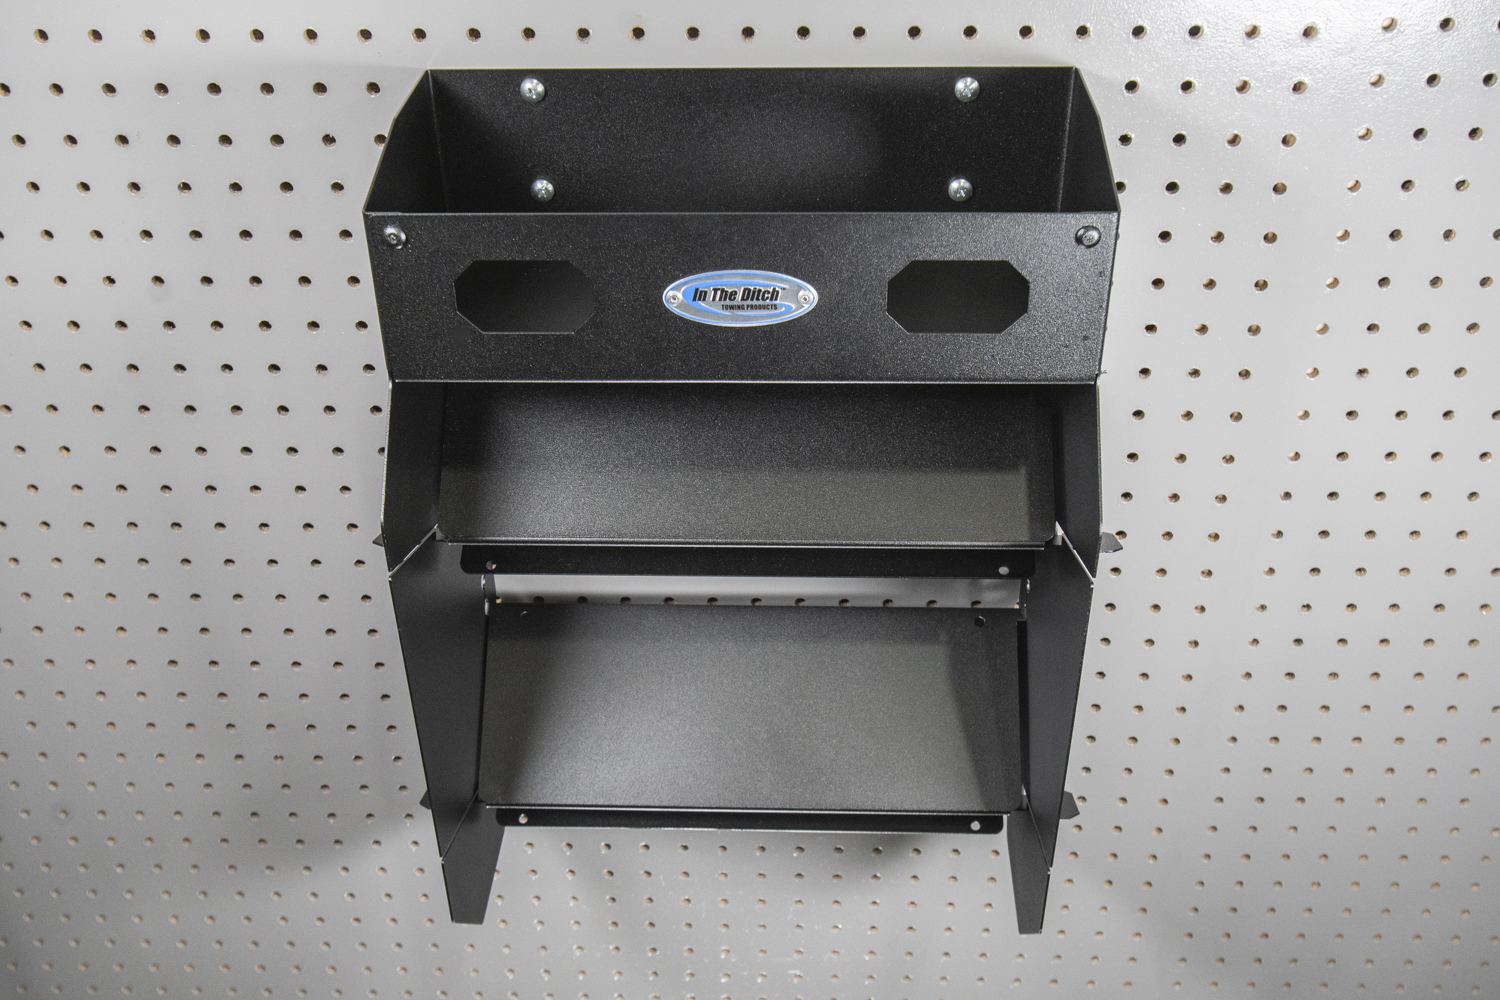 https://intheditch.com/wp-content/uploads/464-In-The-Ditch-Garage-Paper-Towel-Holder-Double-w-Shelf-ITD1765.jpg